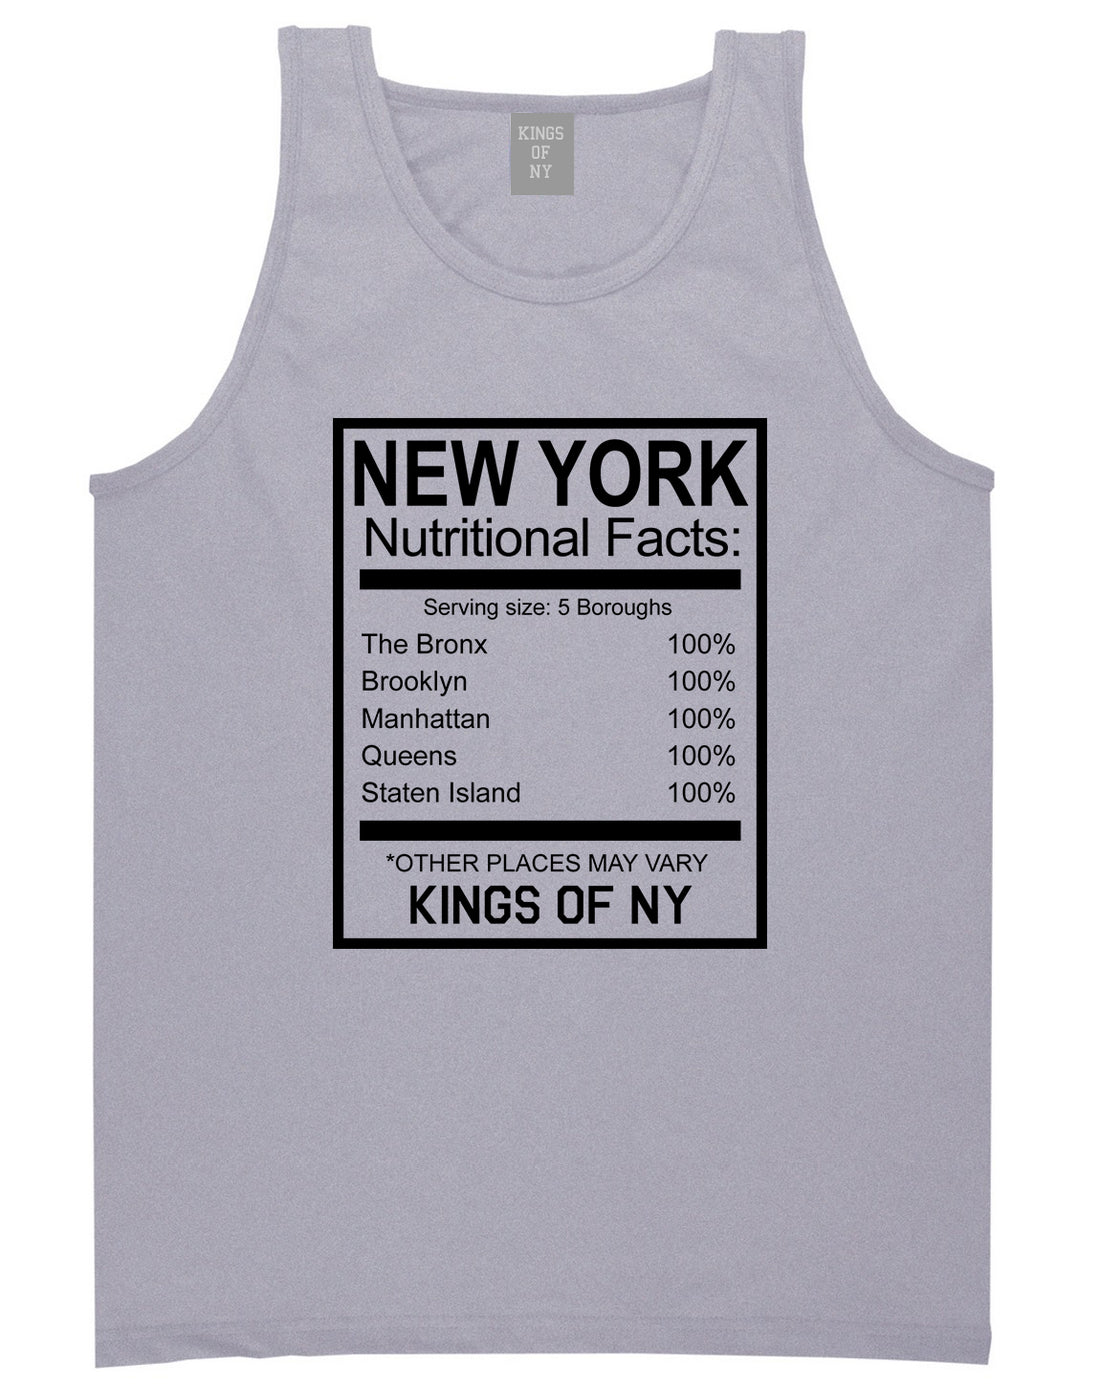 New York Nutritional Facts Tank Top Shirt in Grey